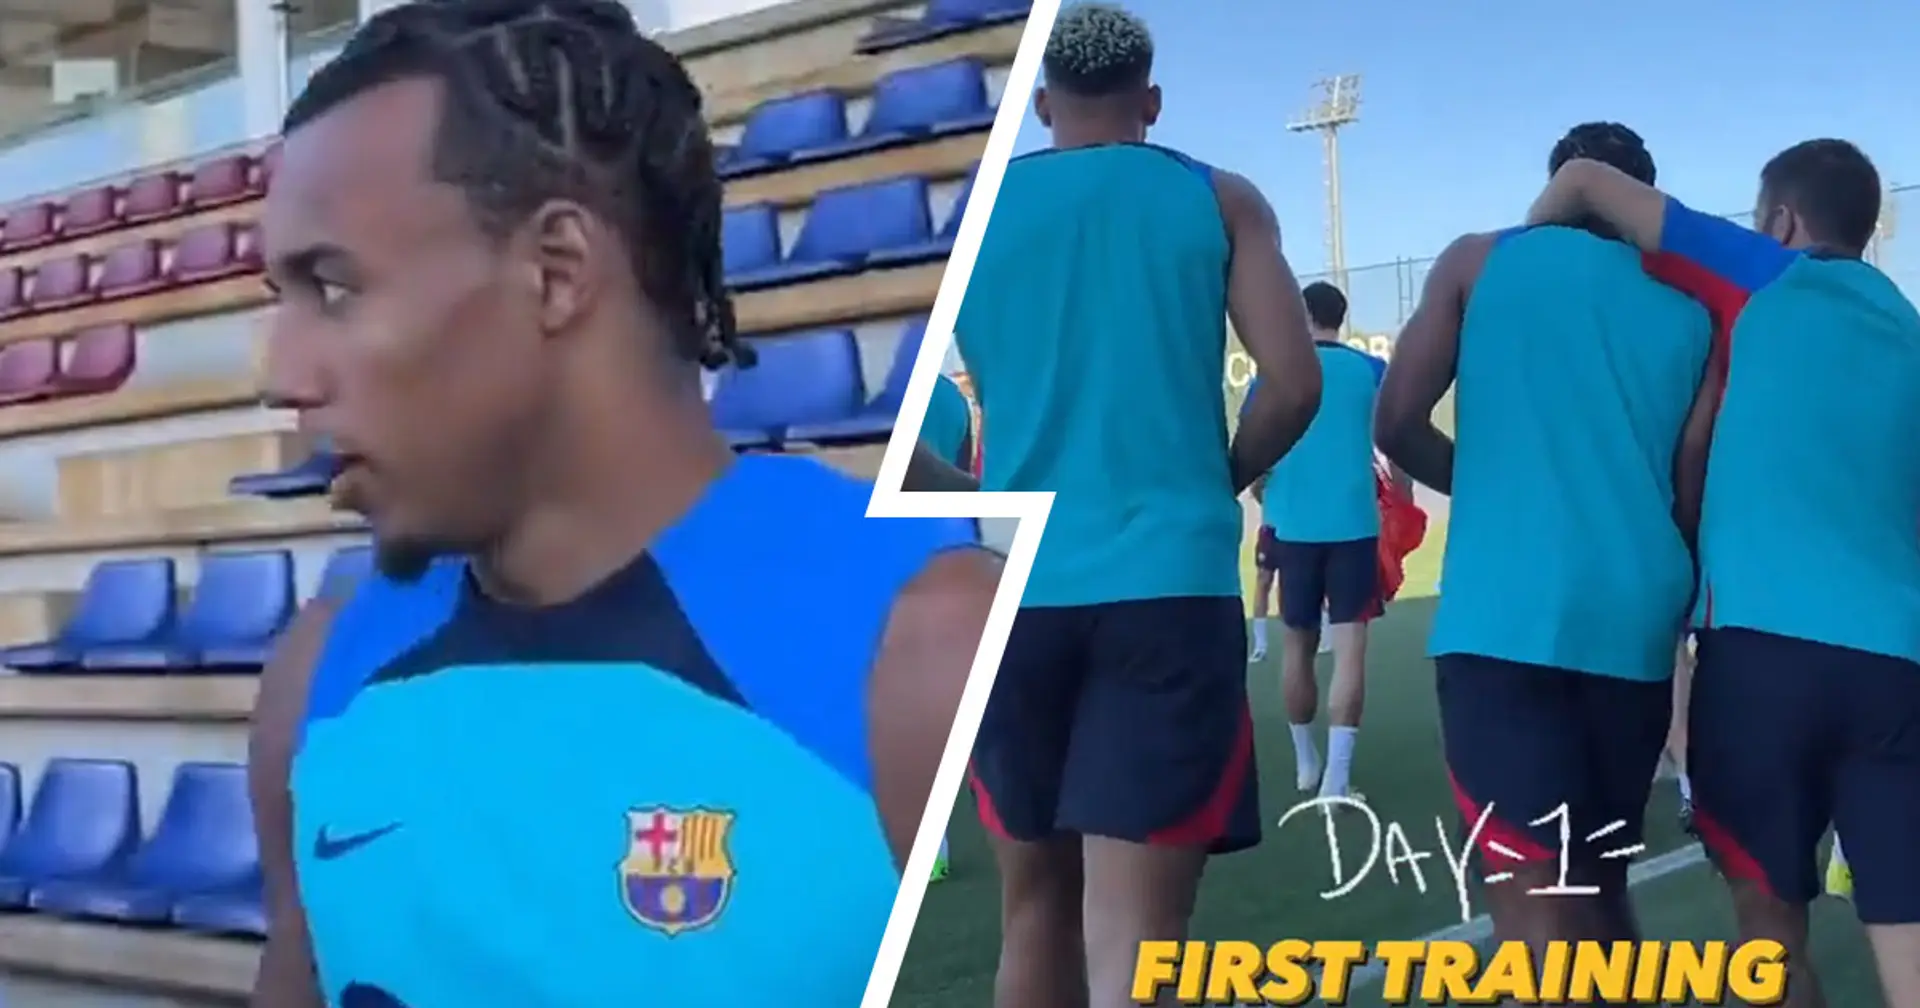 Kounde joins Barca's group training for the first time, seems friends with Alba again (video)